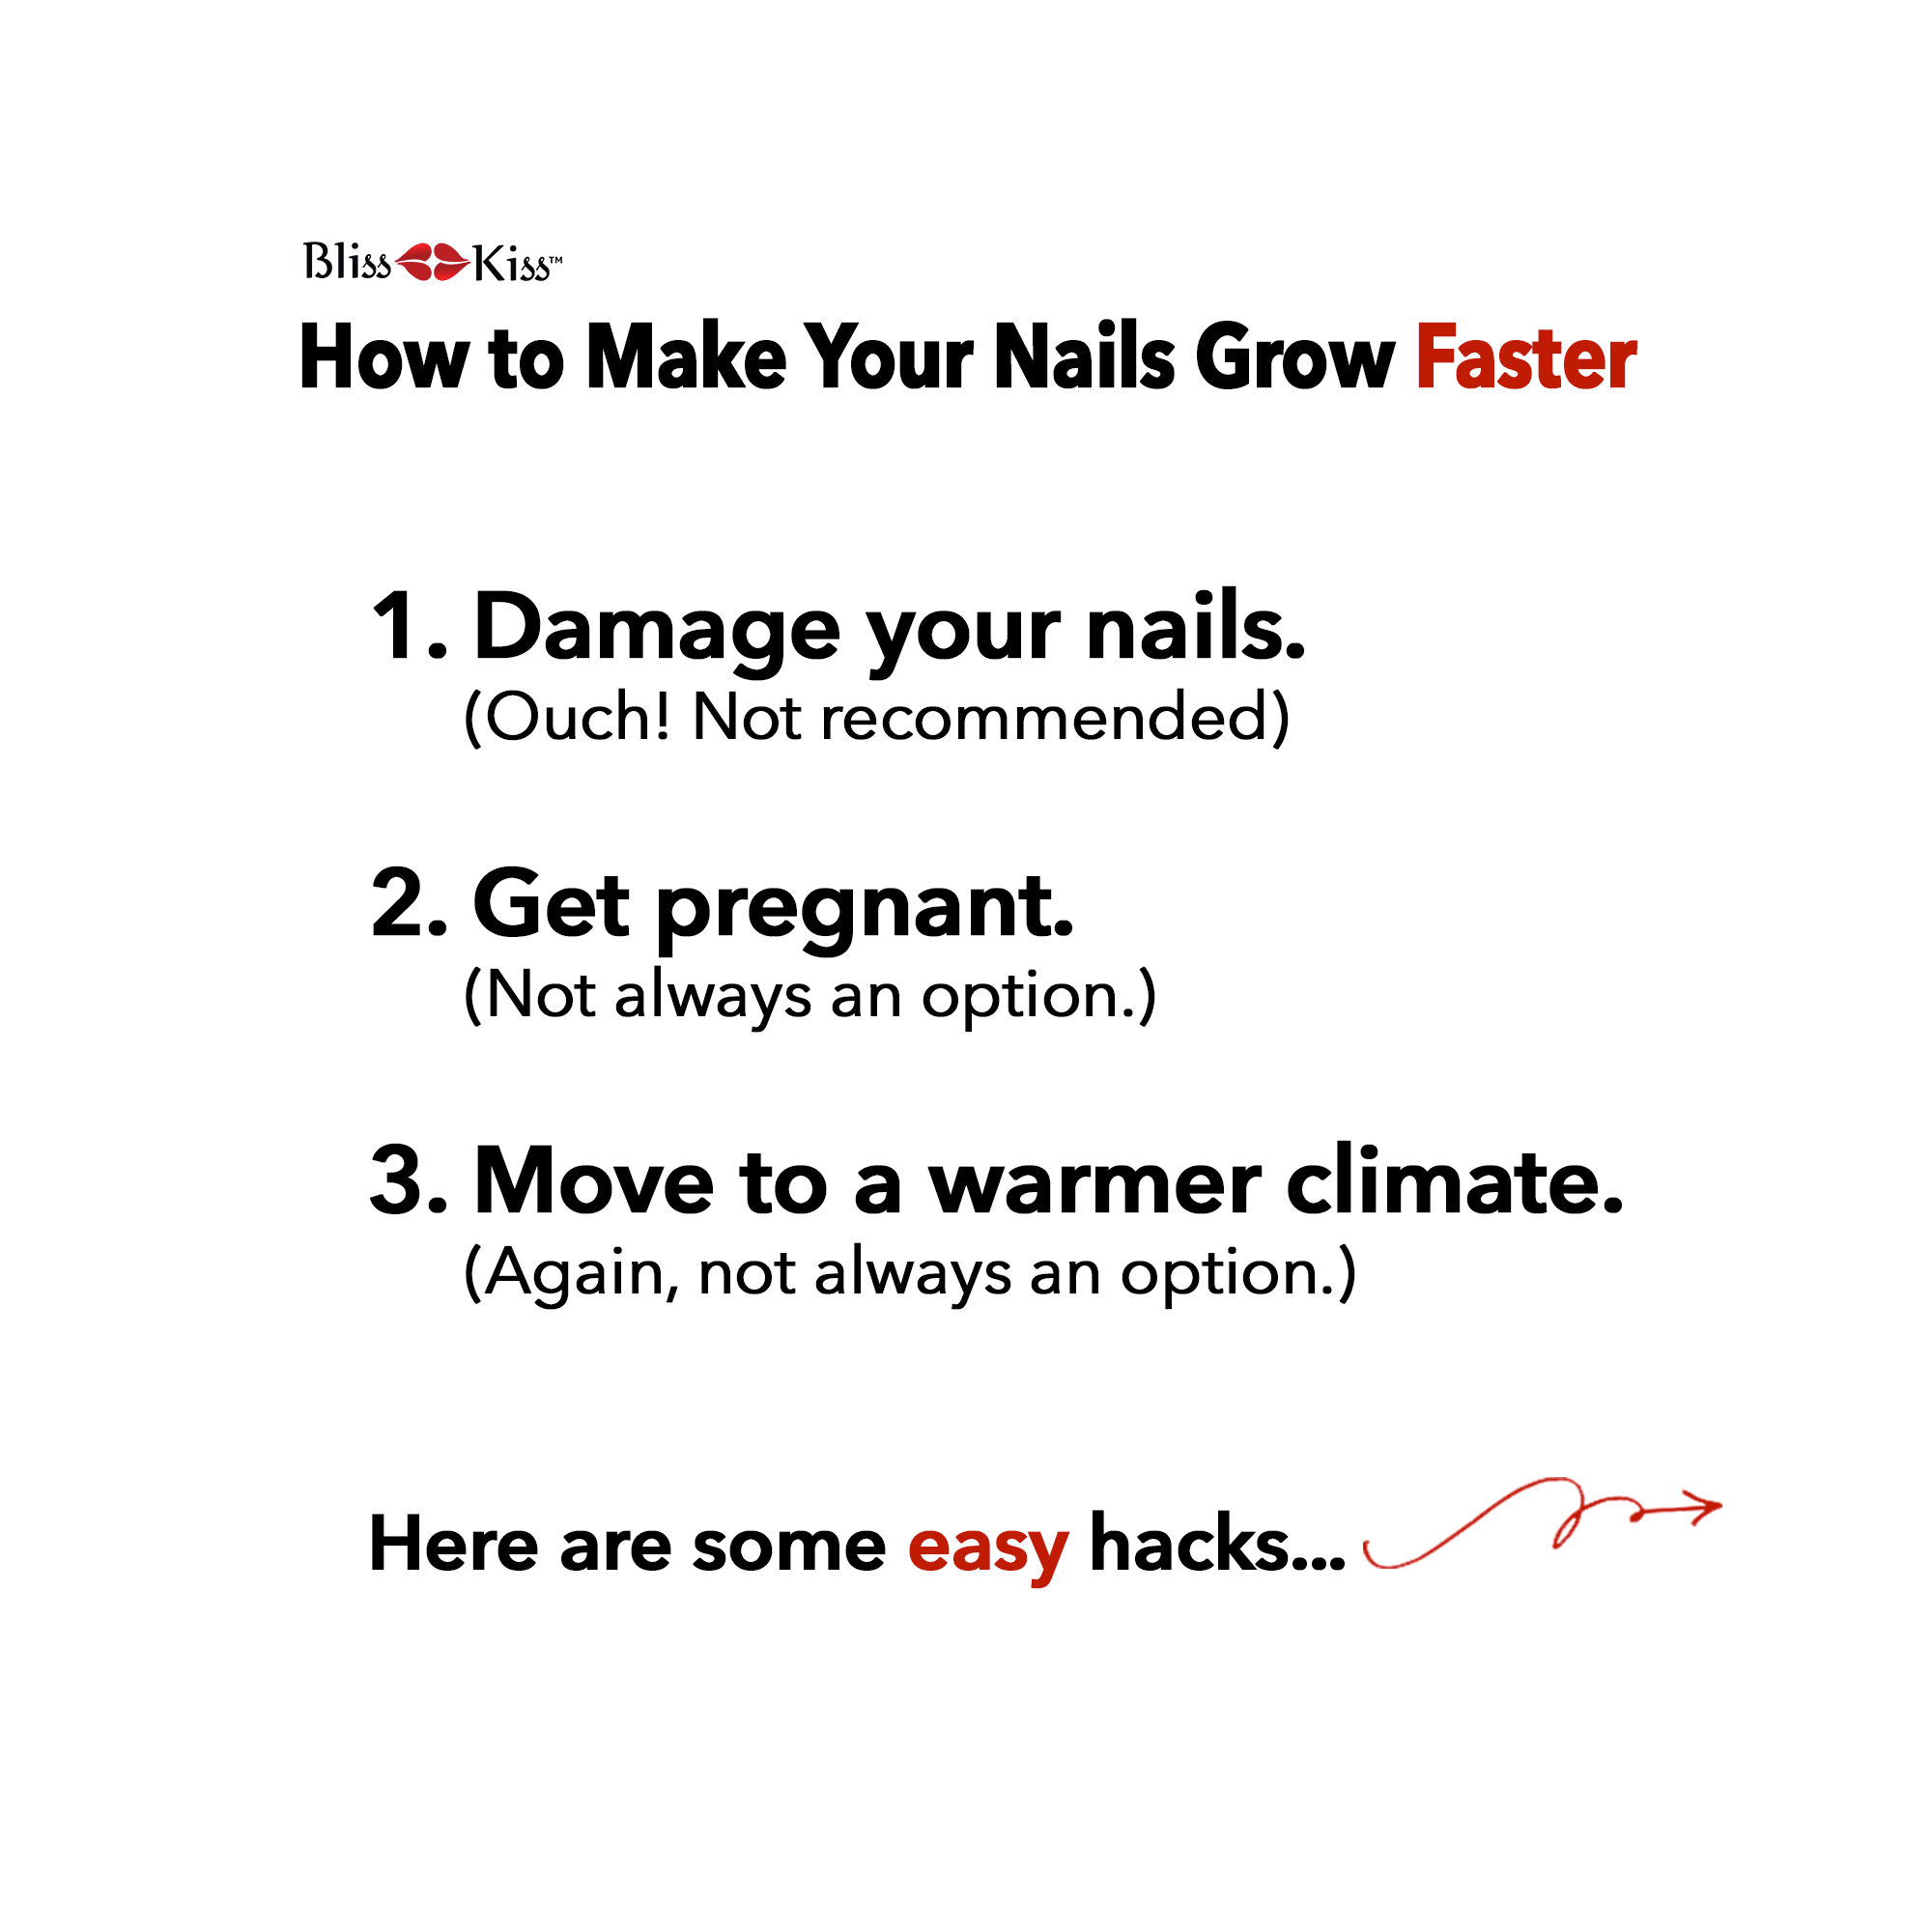 How to Make Your Nails Grow FASTER! - Bliss Kiss by Finely